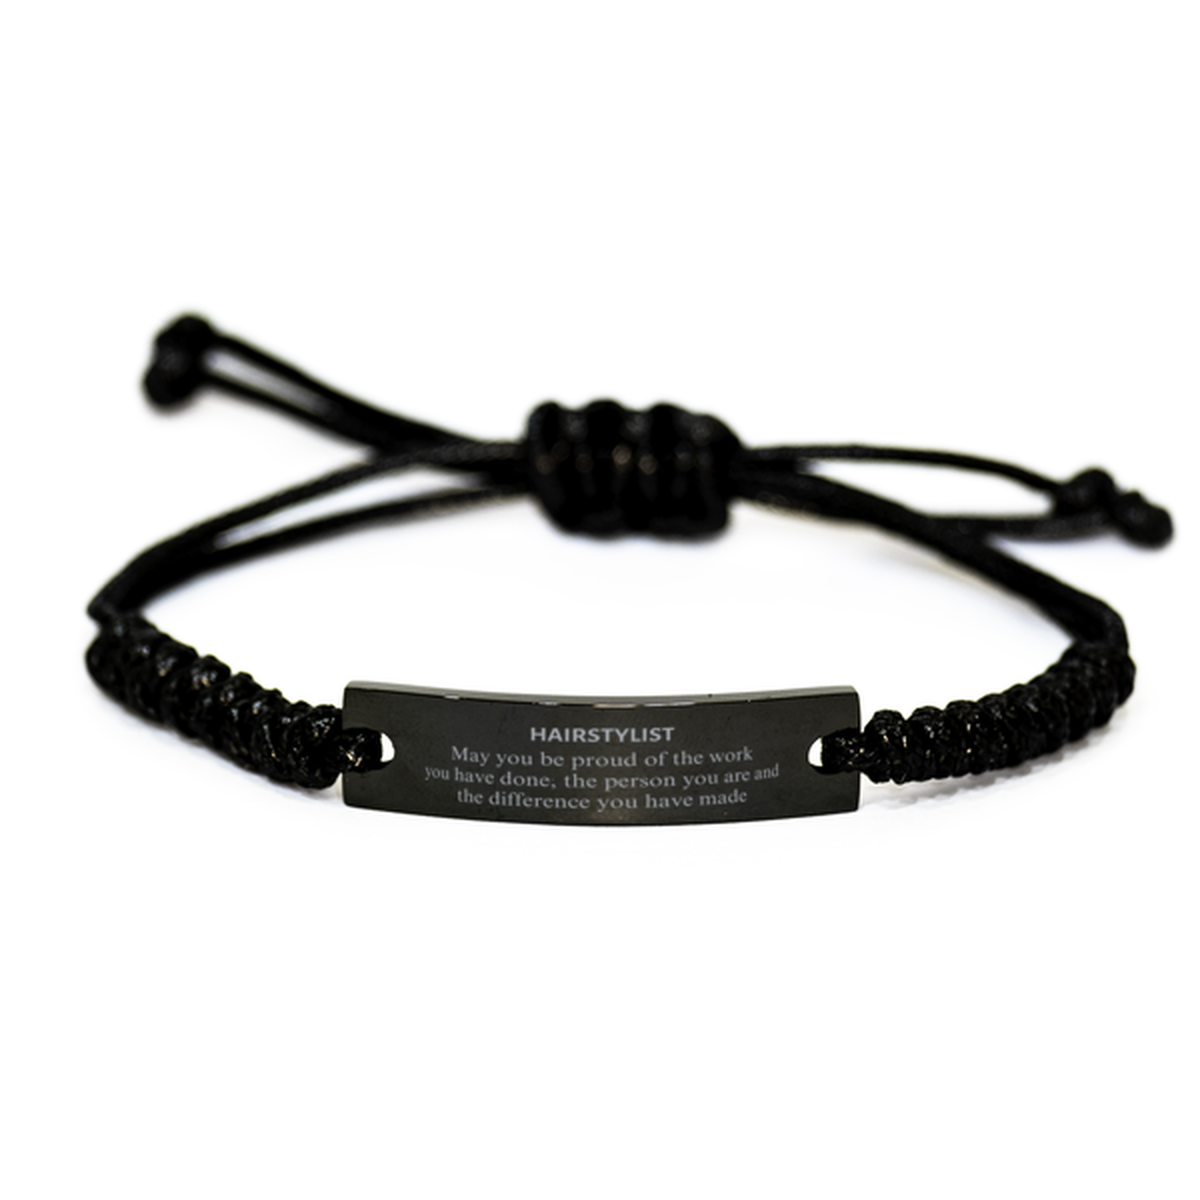 Hairstylist May you be proud of the work you have done, Retirement Hairstylist Black Rope Bracelet for Colleague Appreciation Gifts Amazing for Hairstylist